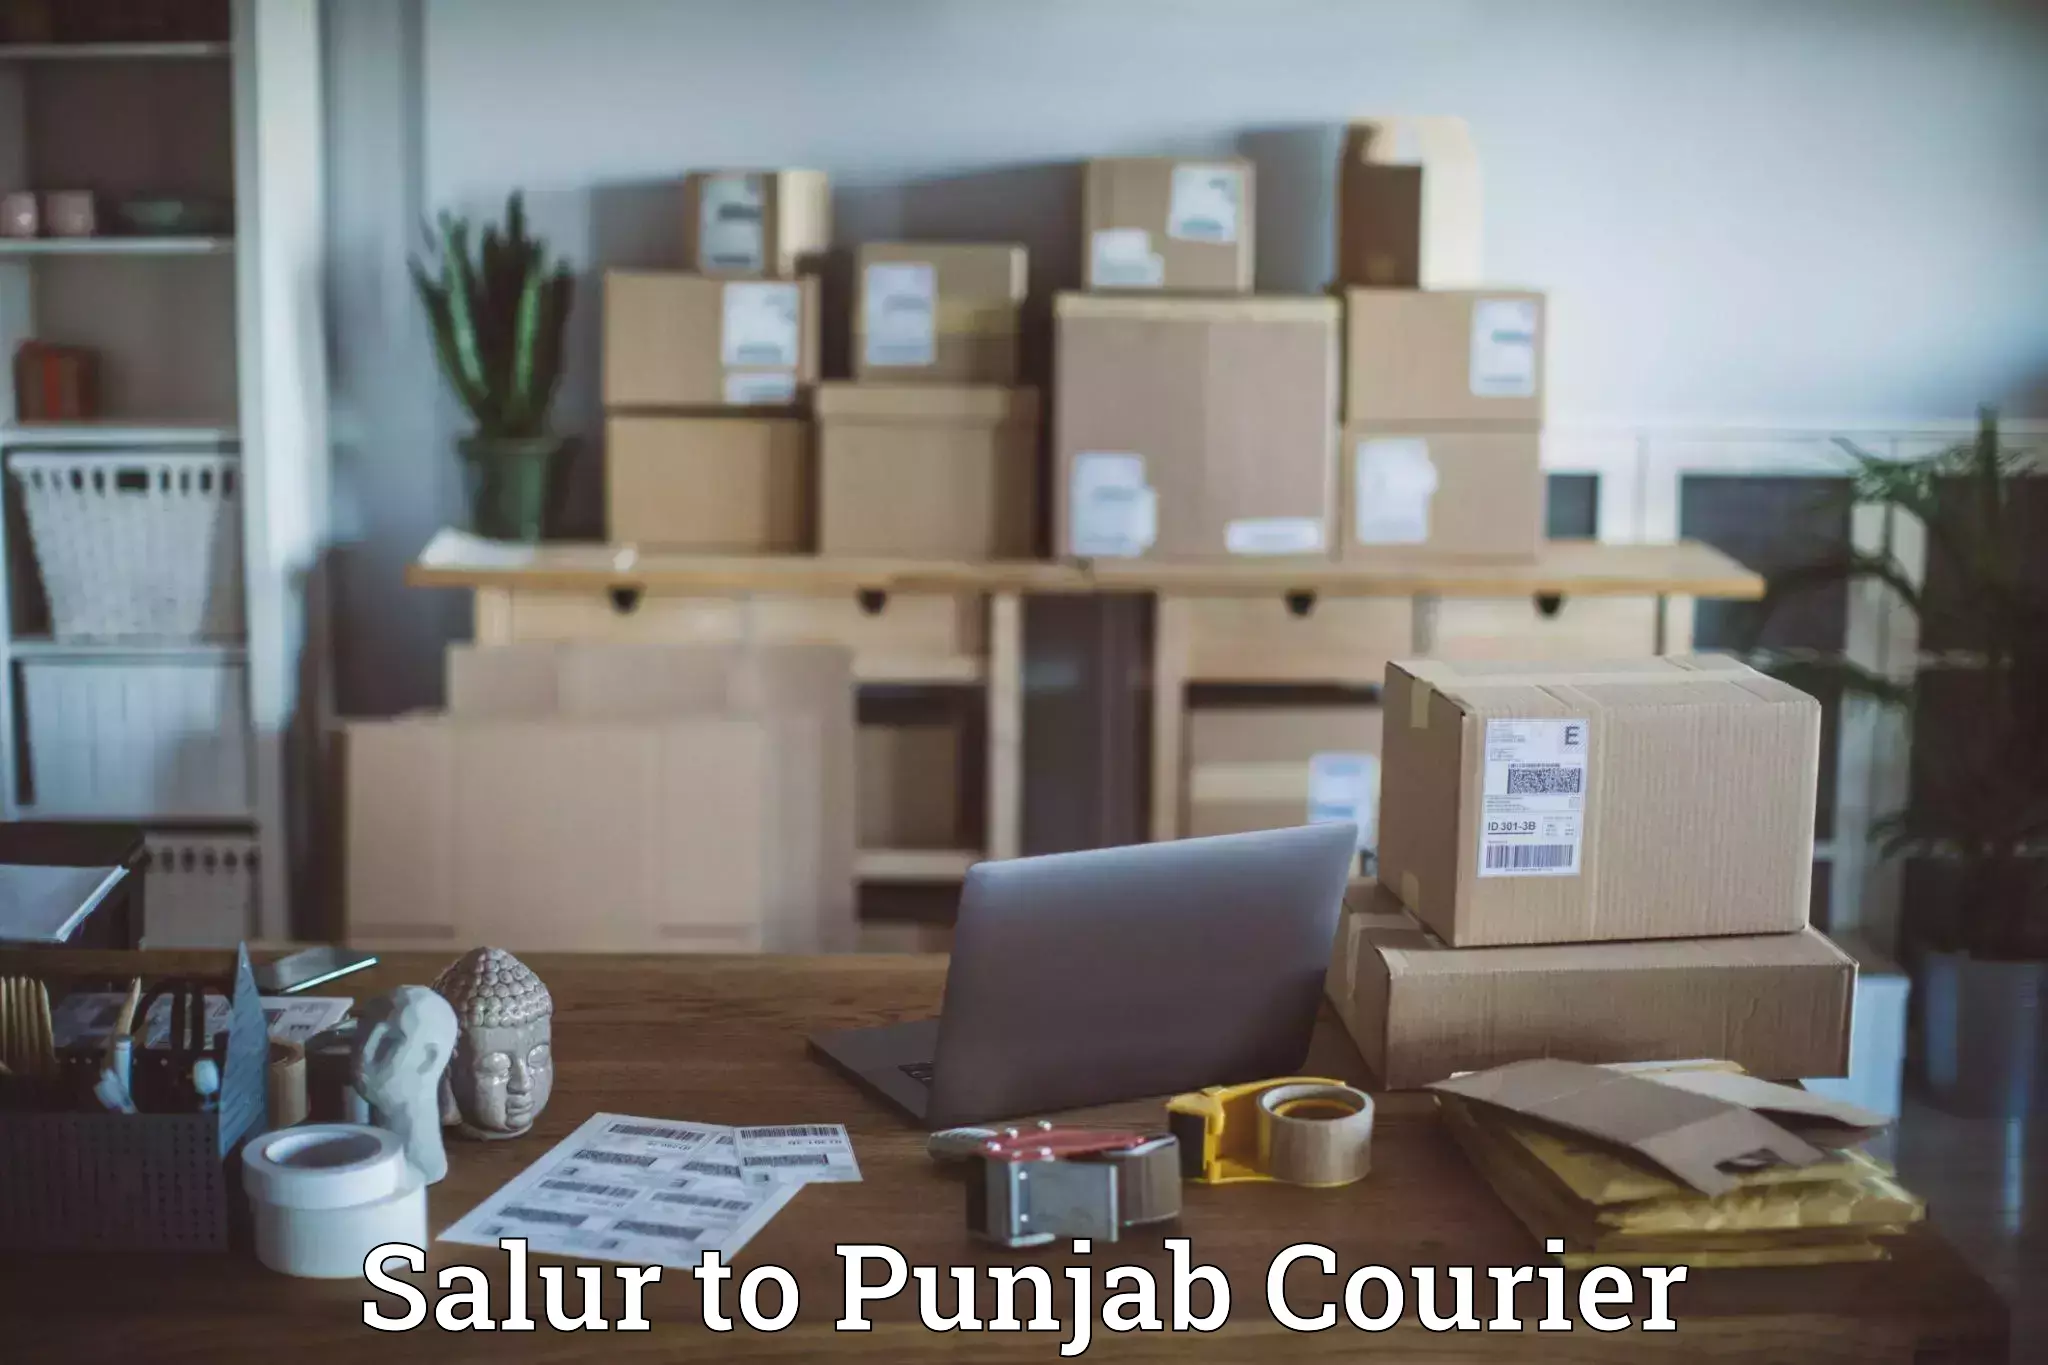 Easy access courier services in Salur to Dharamkot